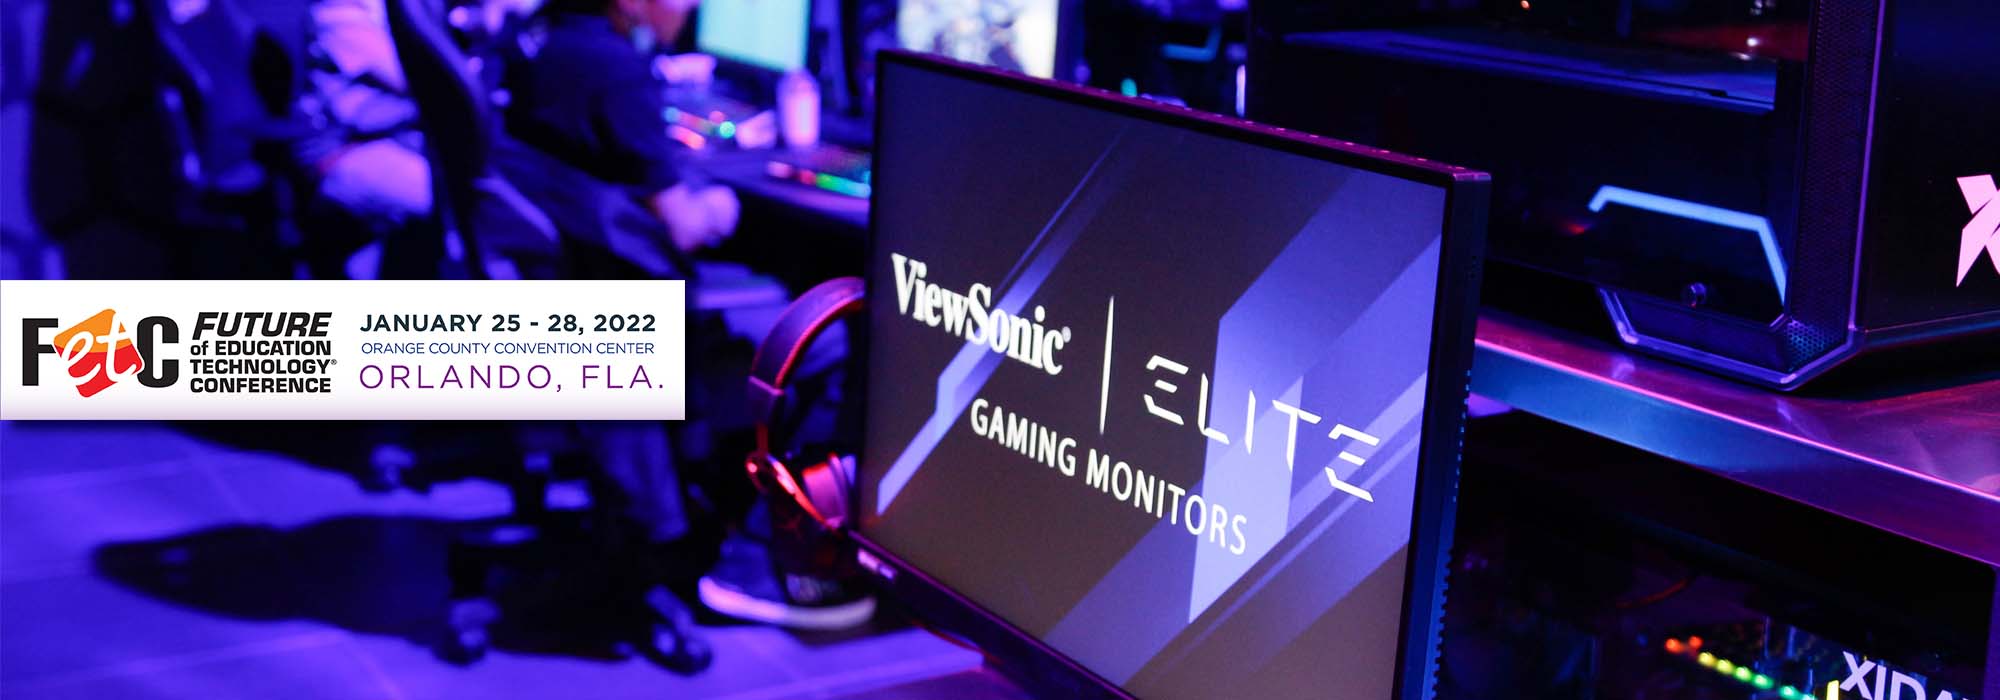 ViewSonic Highlights Collaboration Tools and Display Technologies; Gaming Stations in the Esports Theater at FETC 2022